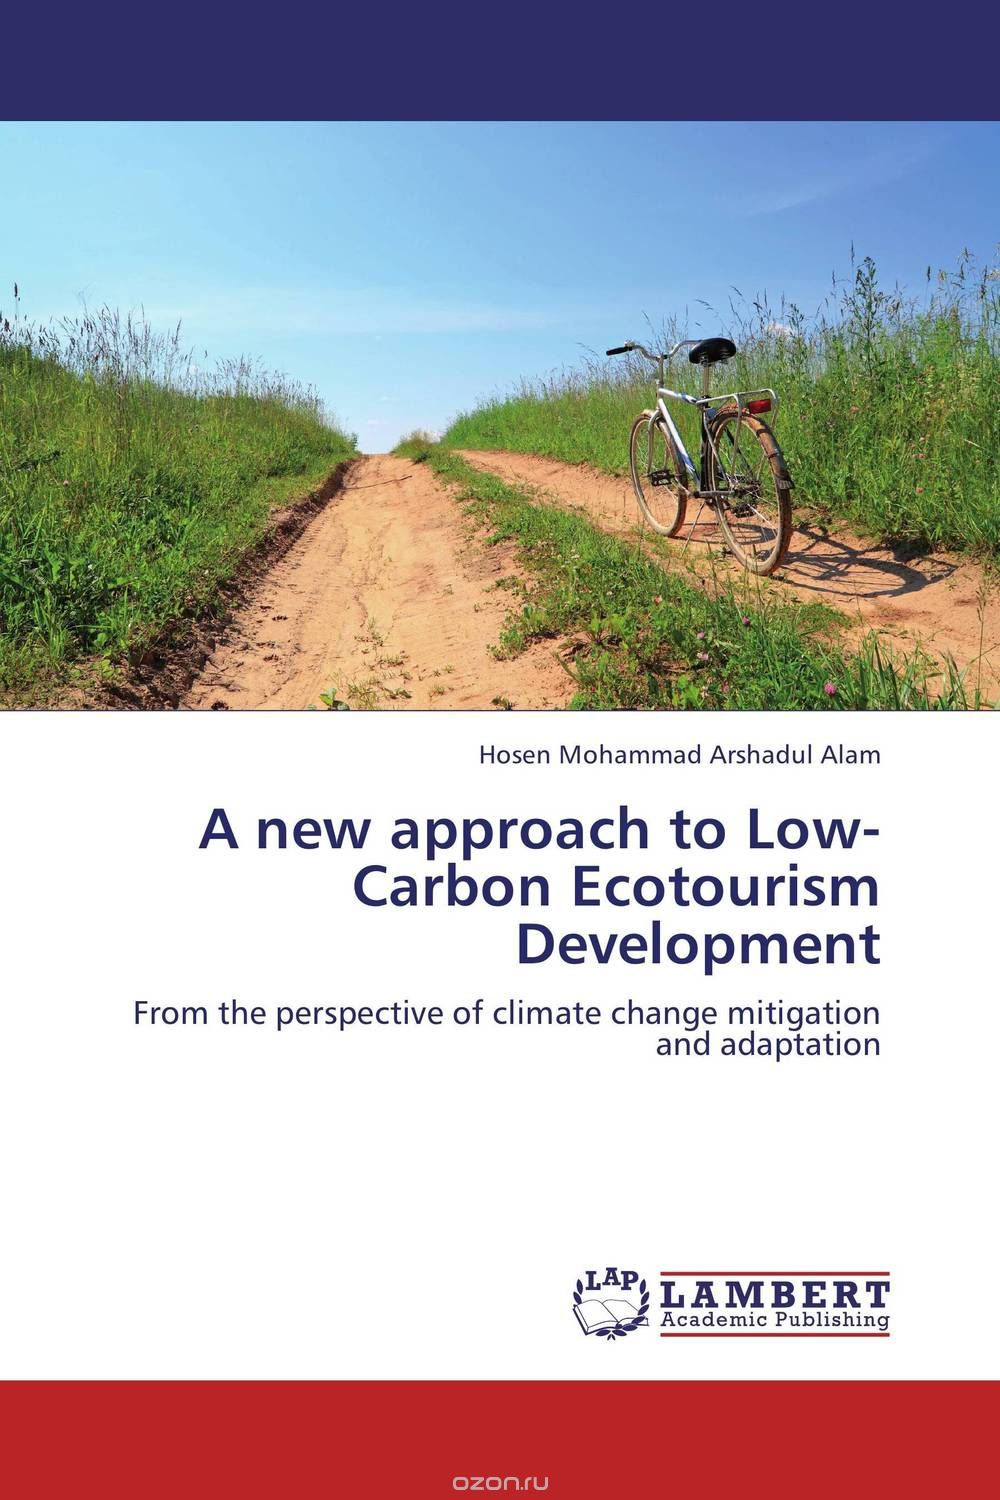 A new approach to Low-Carbon Ecotourism Development